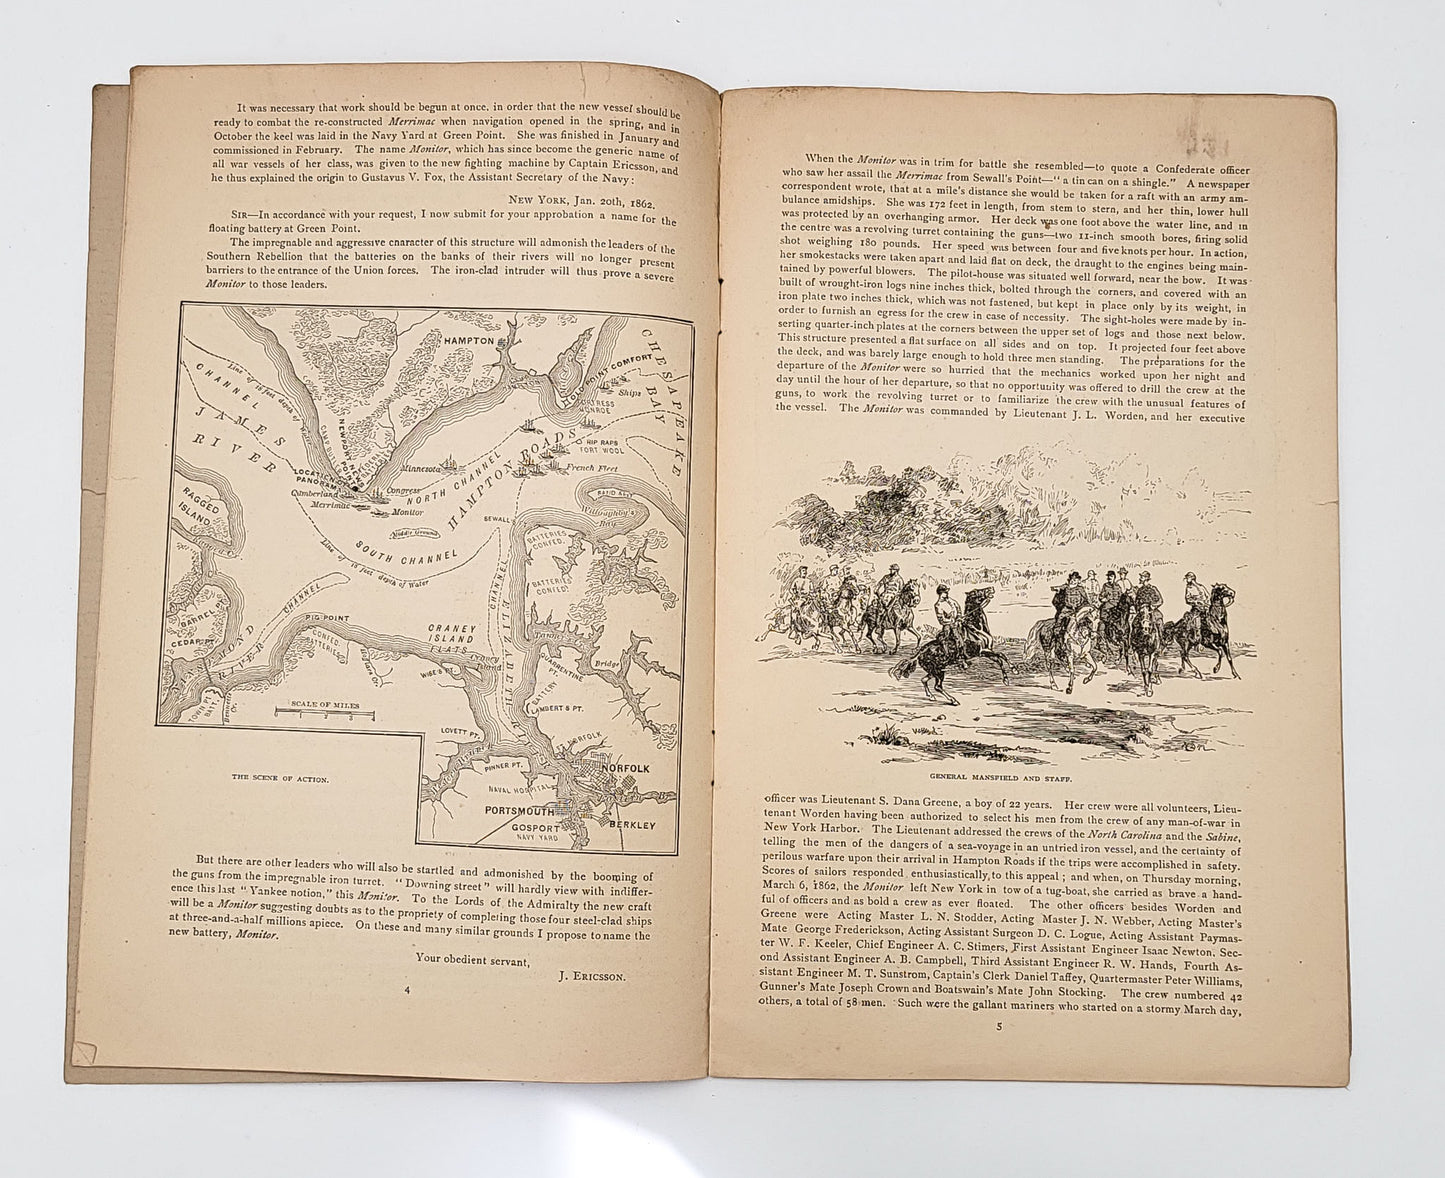 The Merrimac and Monitor Naval Engagement Illustrated